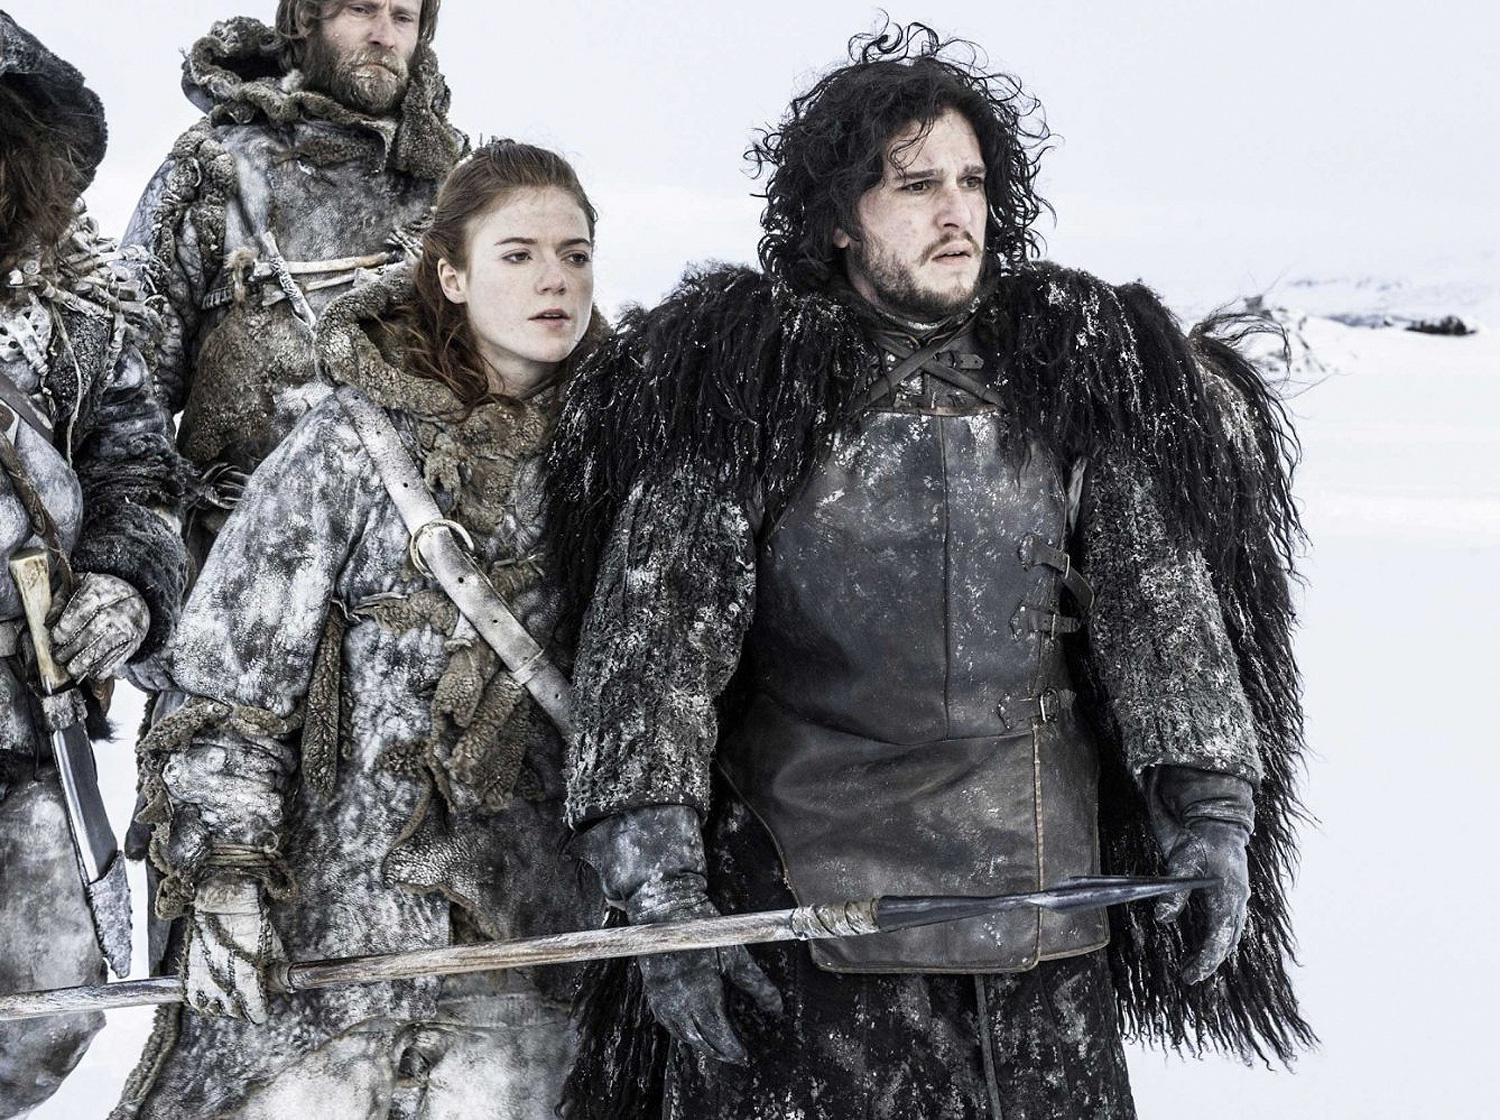 Rose Leslie and Kit Harington on screen as Ygritte and Jon Snow